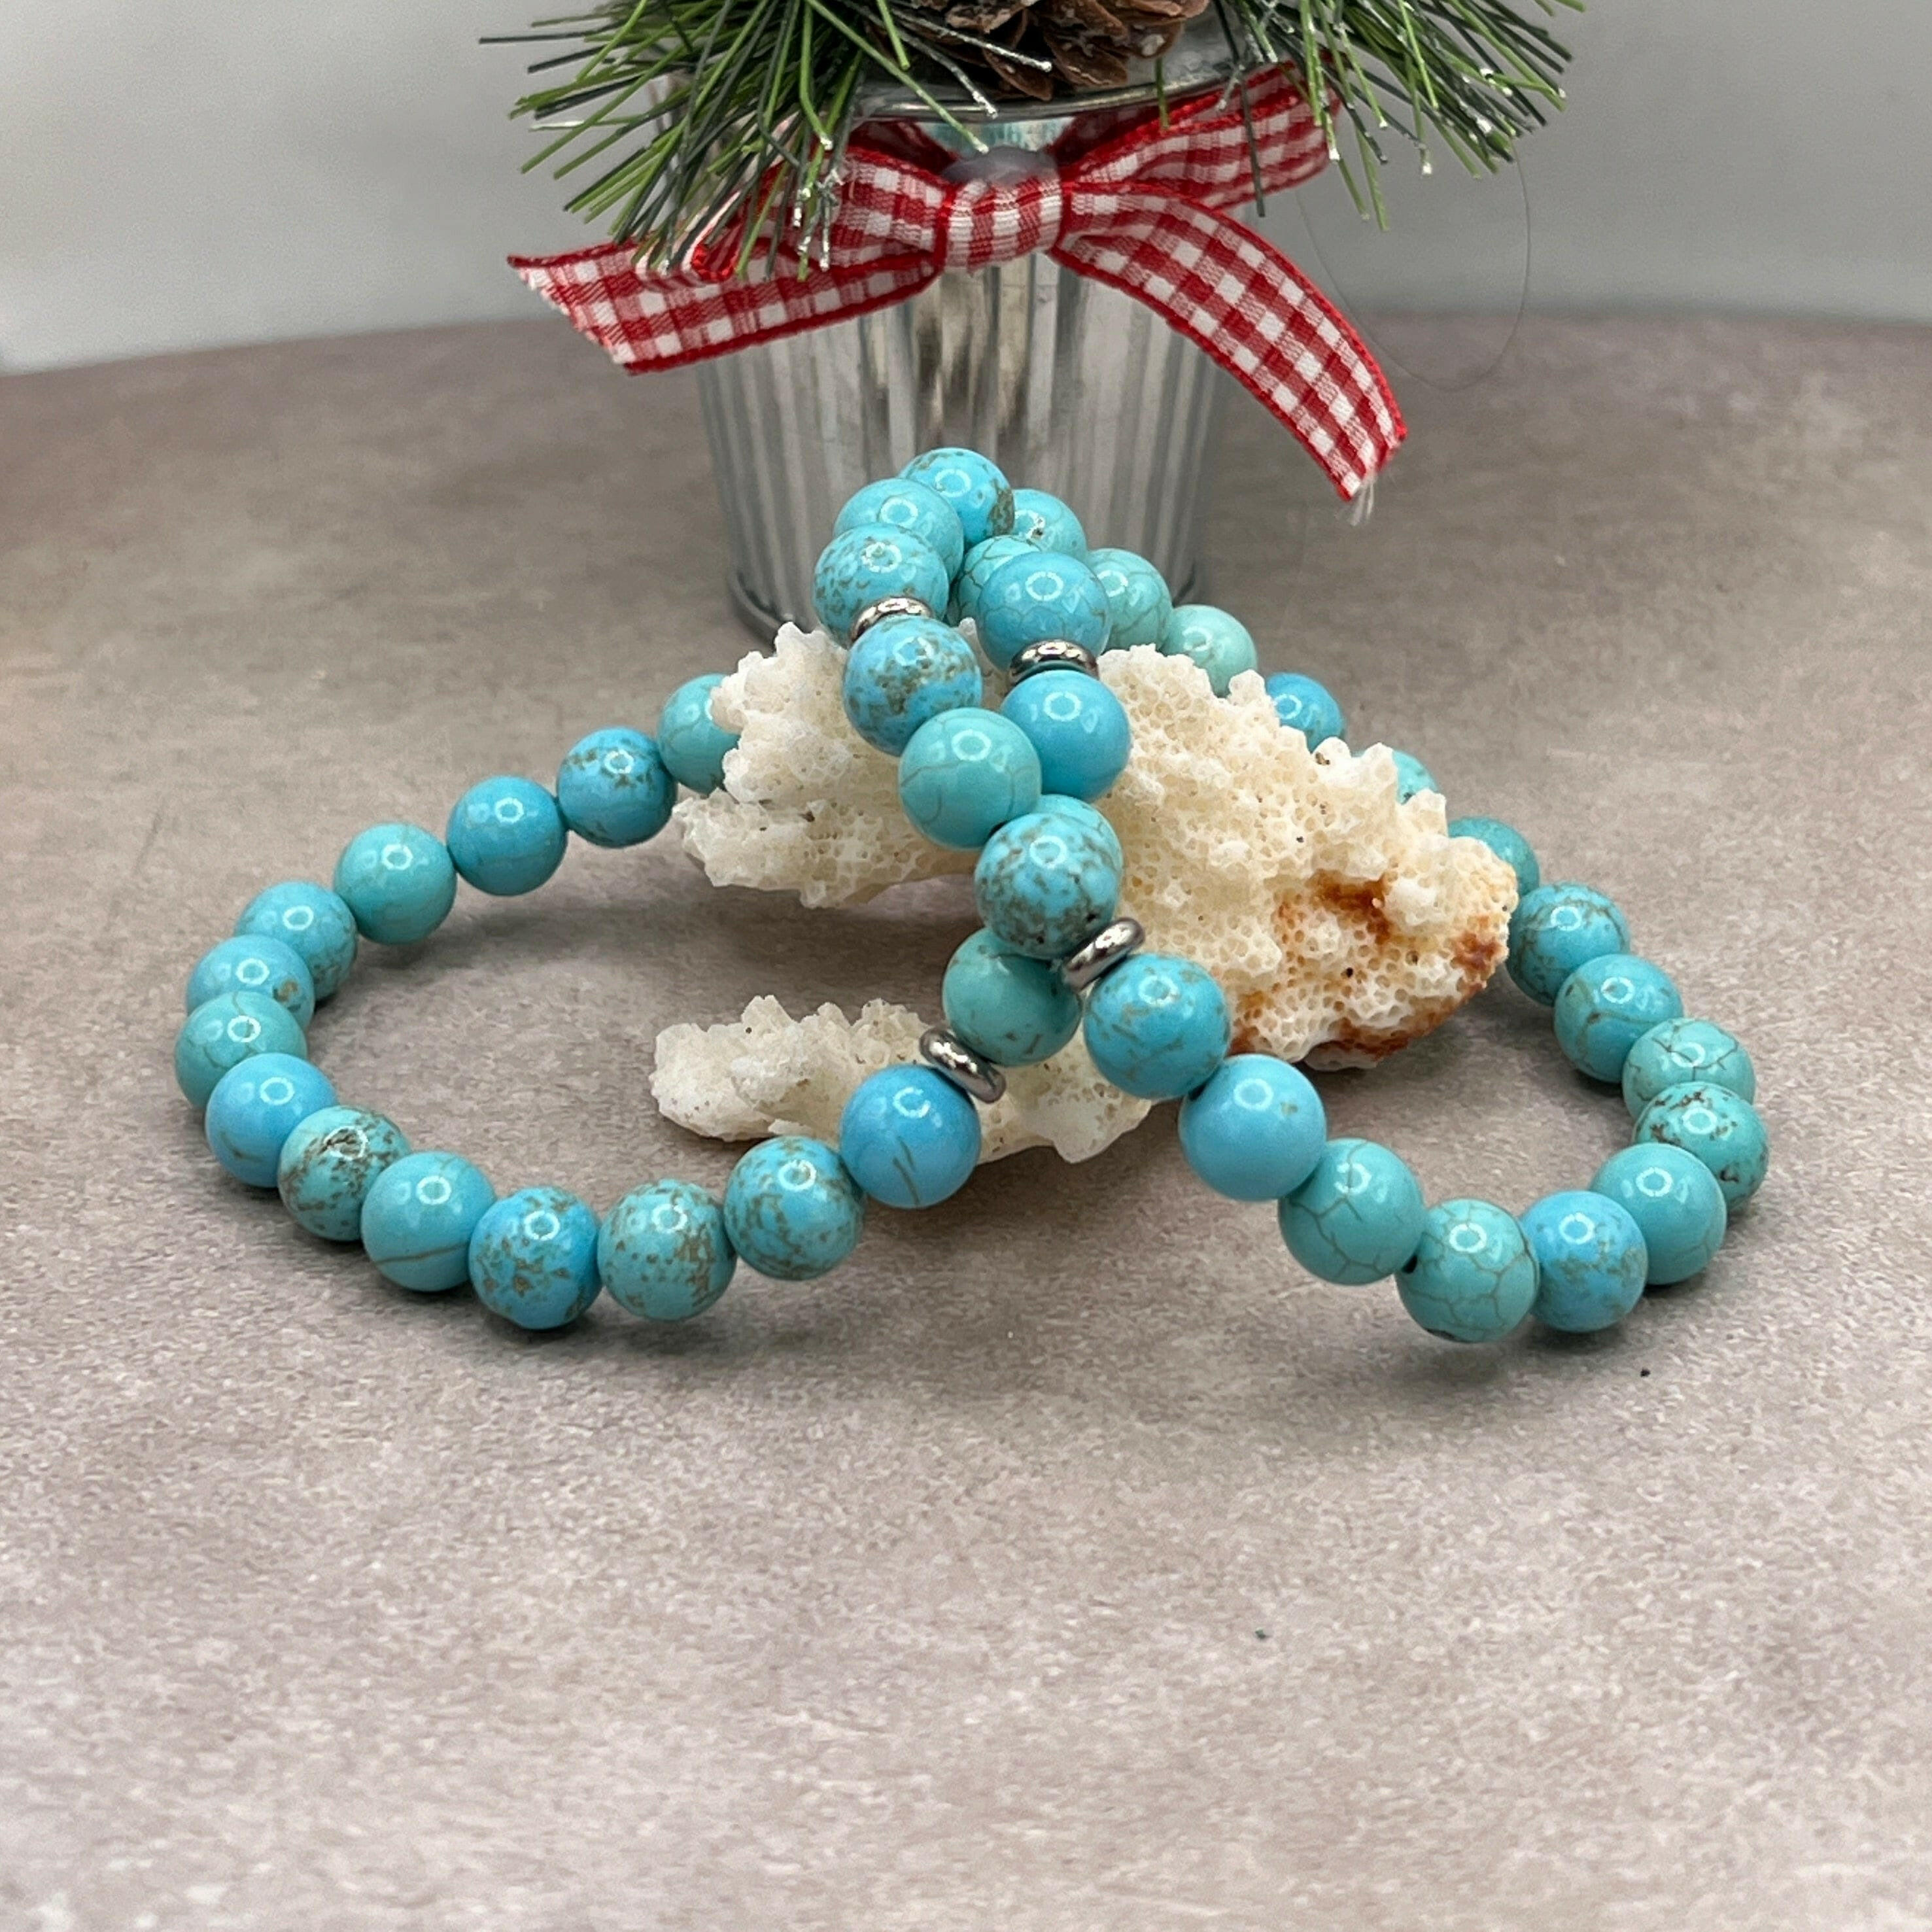 Bec Sue Jewelry Shop bracelets 6.5 / blue / turquoise Turquoise Stretch Bracelet with Sterling Silver Spacers, Genuine 8mm Beads Tags 655